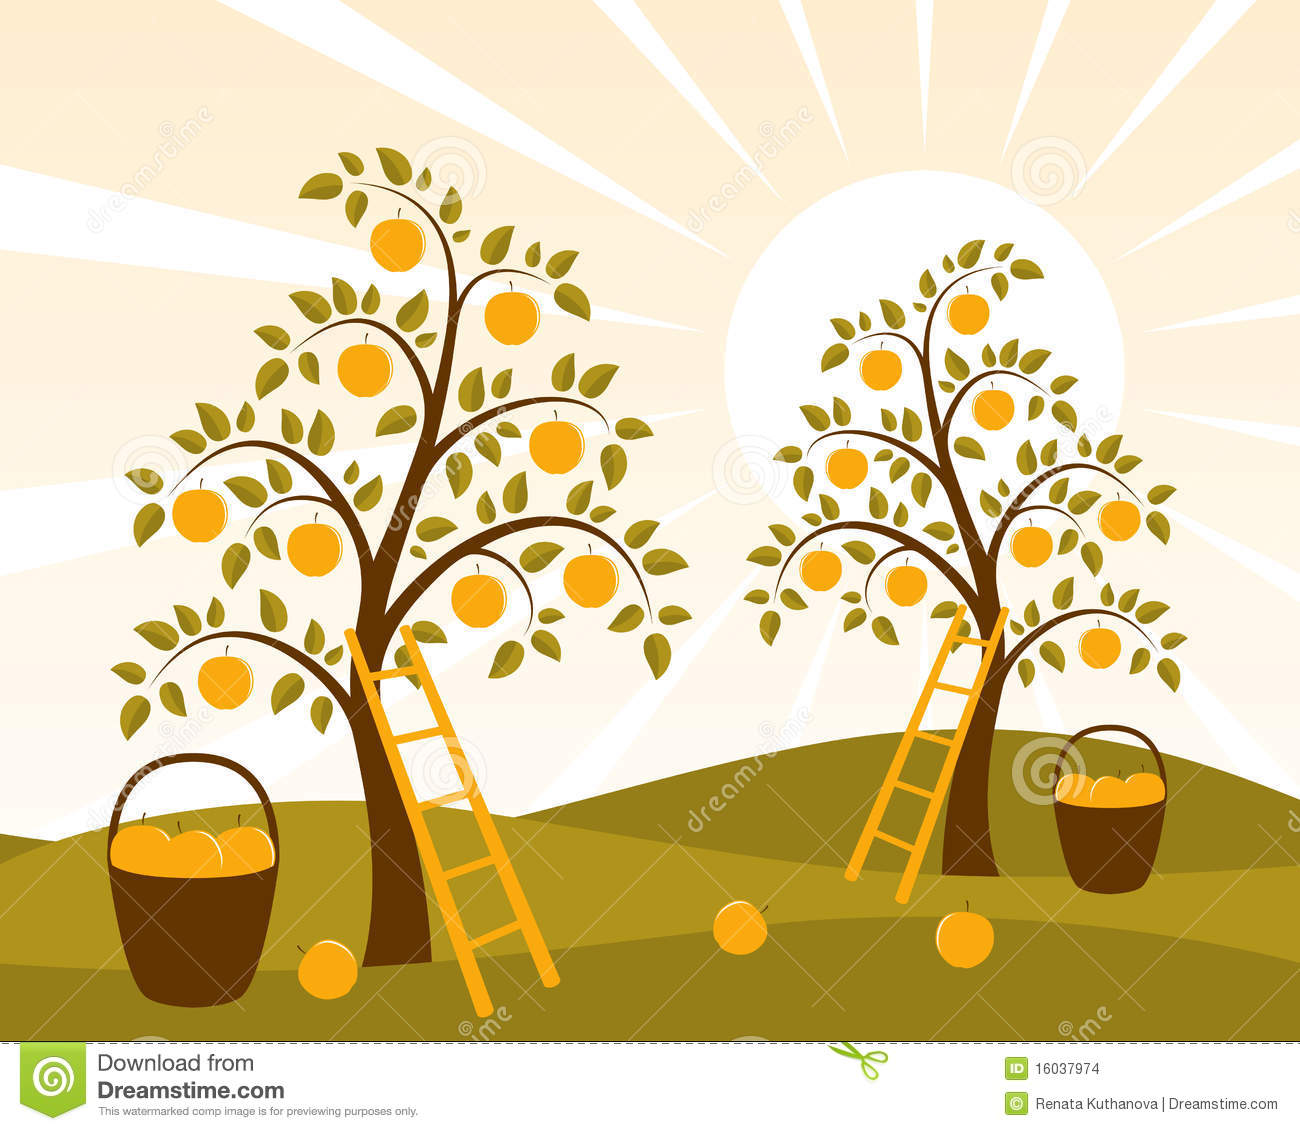 Illustrated Background With Apple Trees And Baskets Of Apples